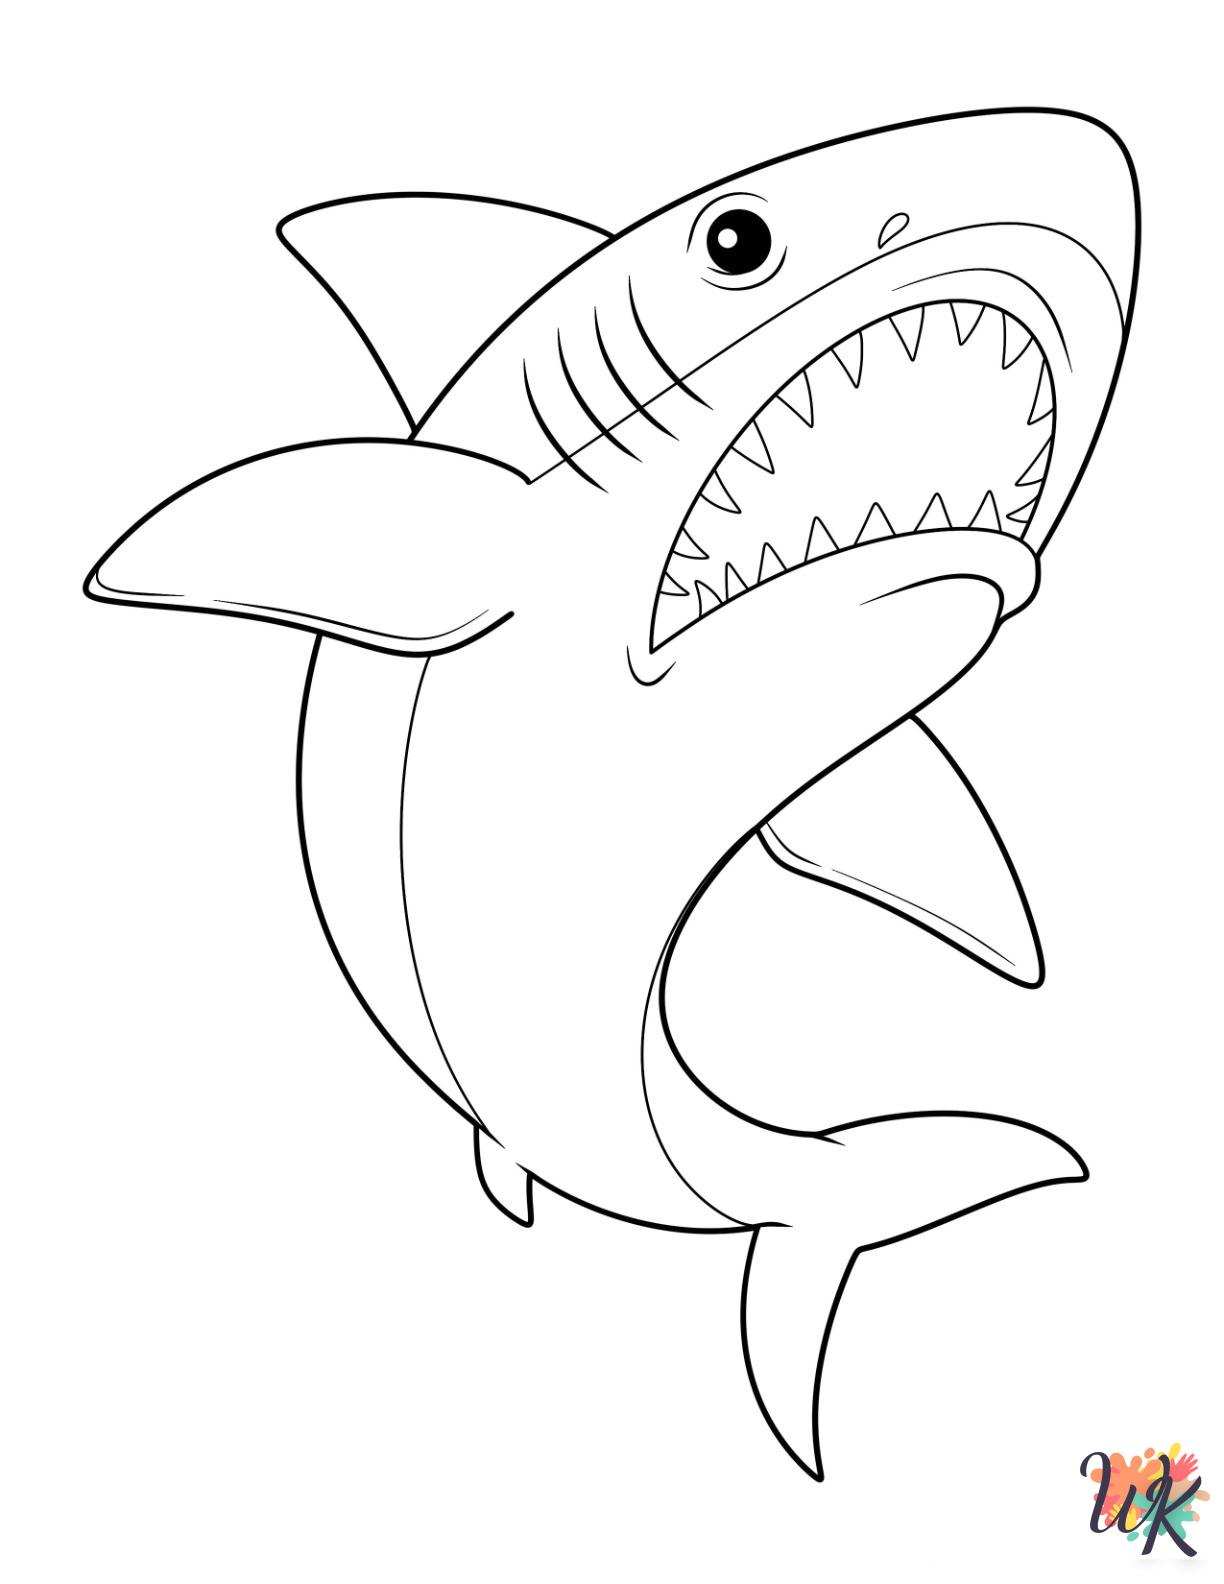 kids Shark coloring pages